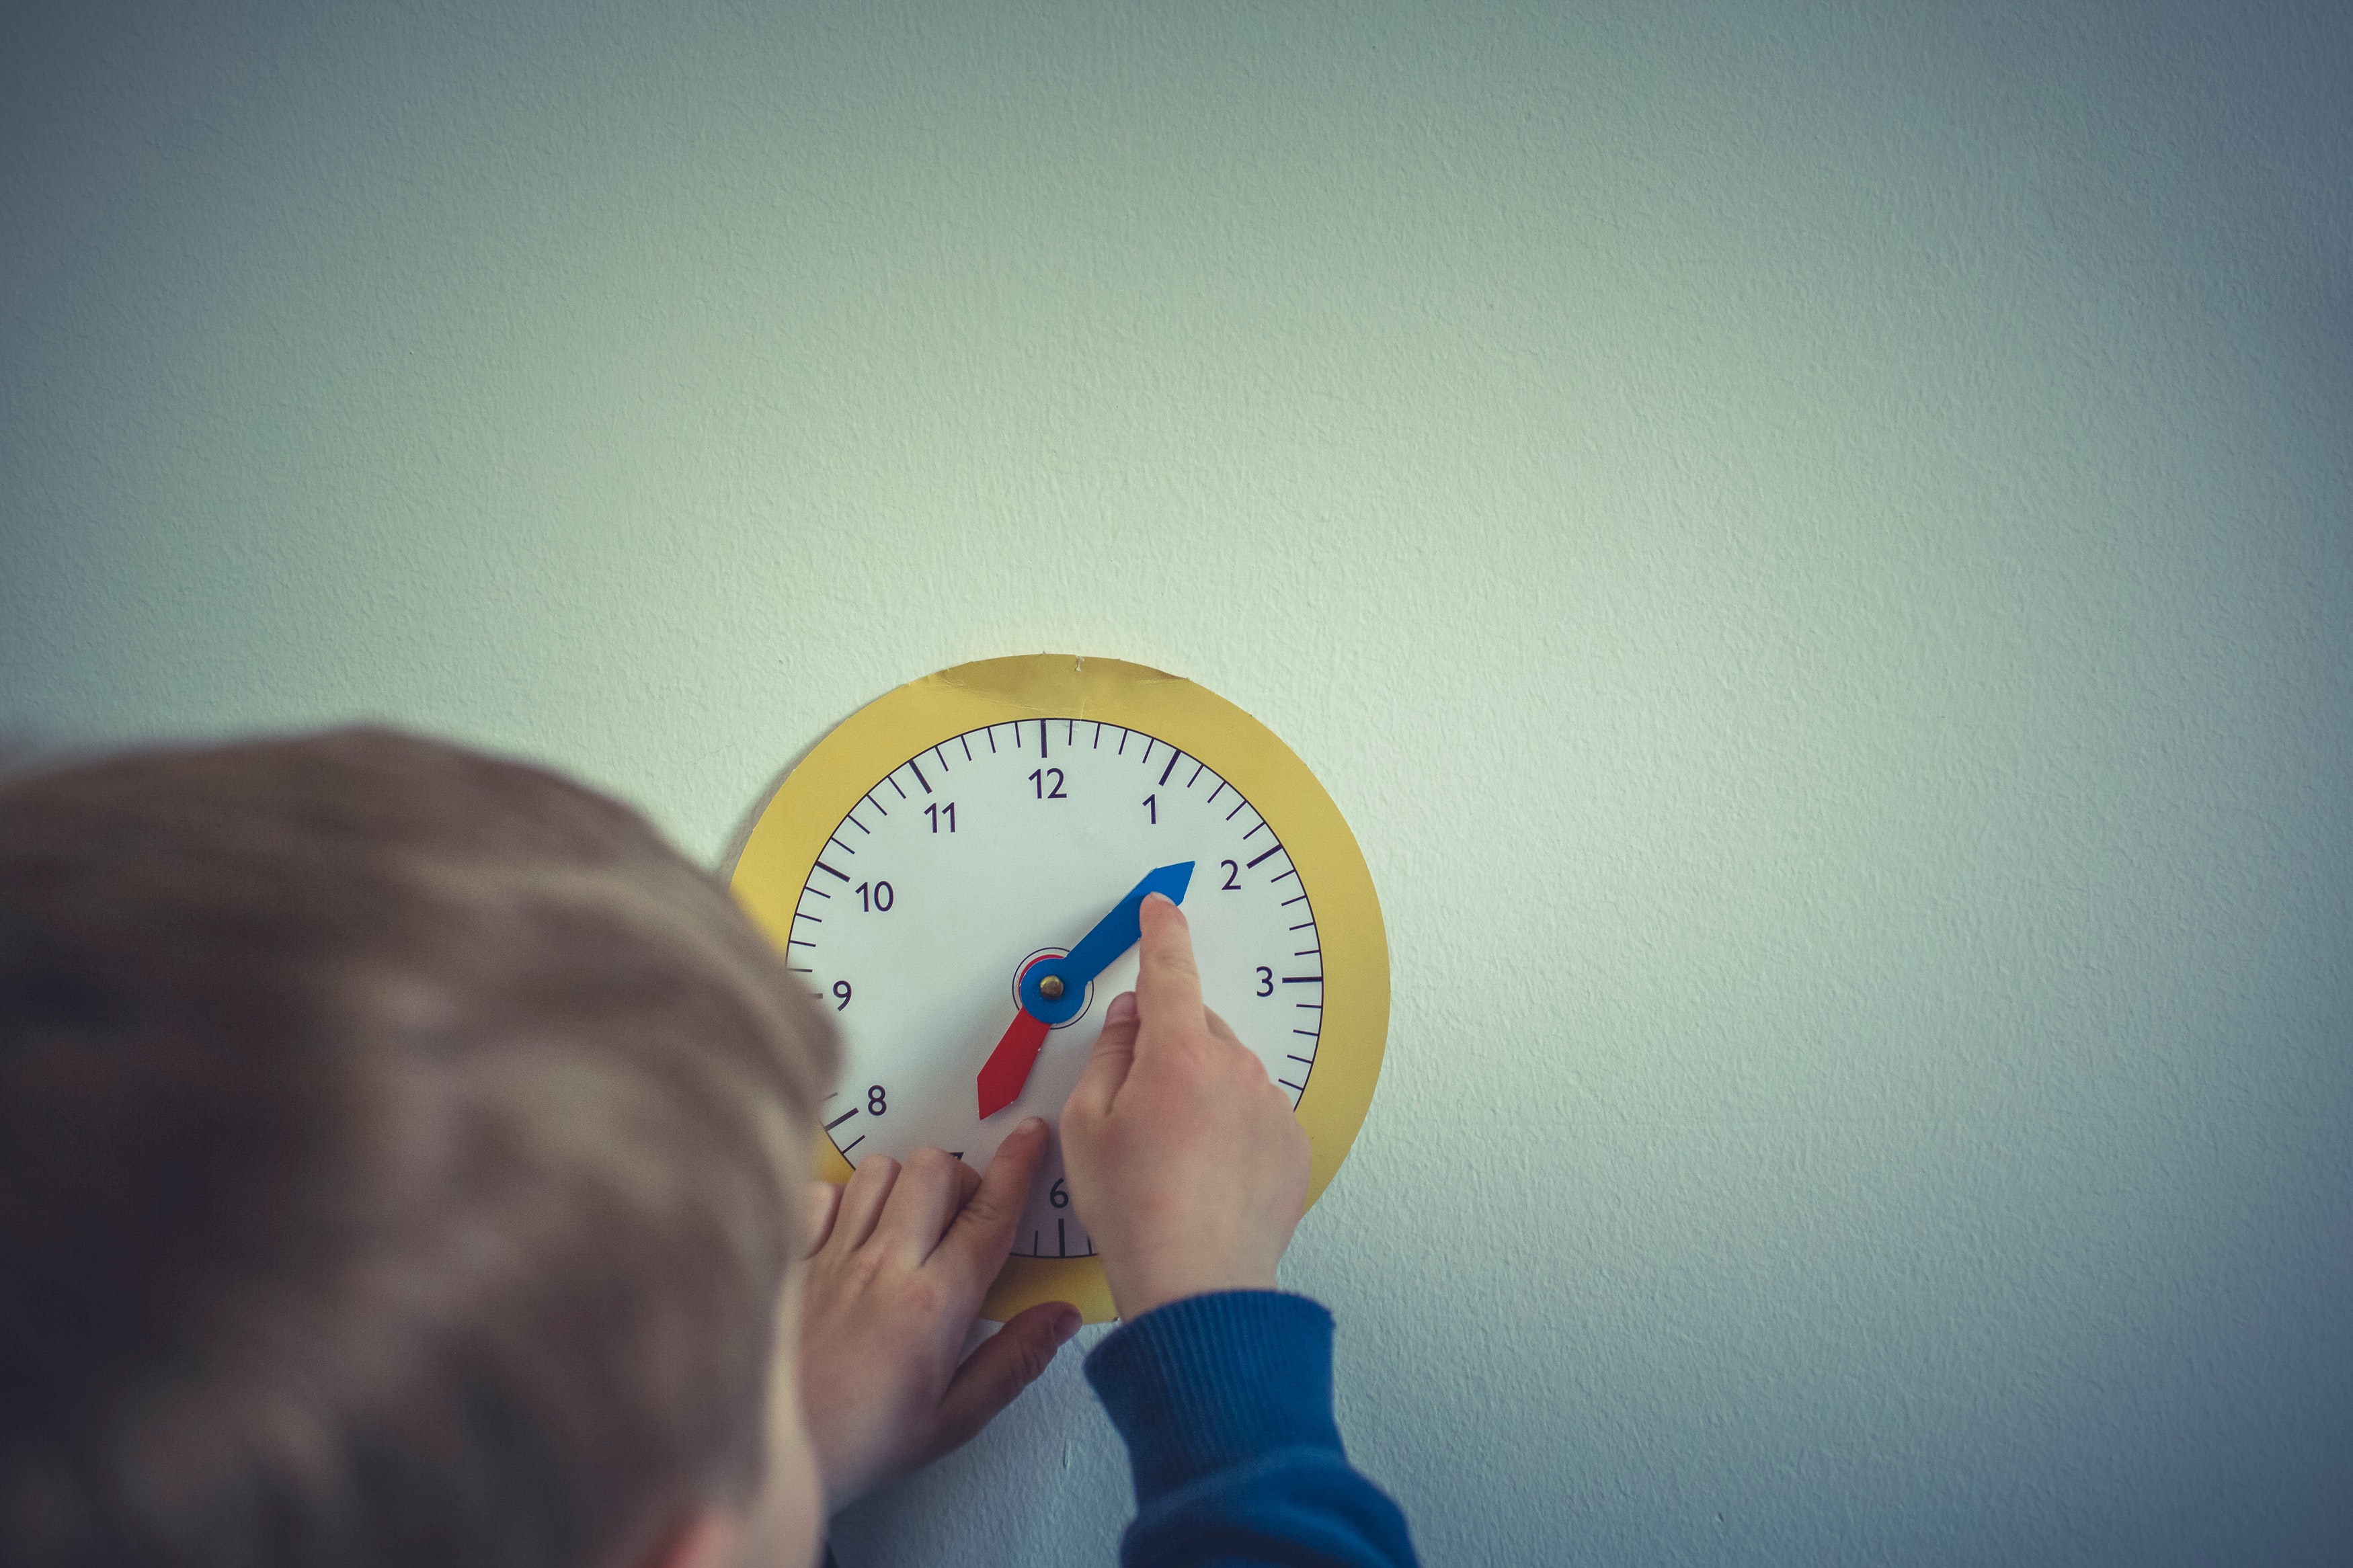 Toddler boy playing with paper clock on wall; image by Markus Spiske, via Unsplash.com.